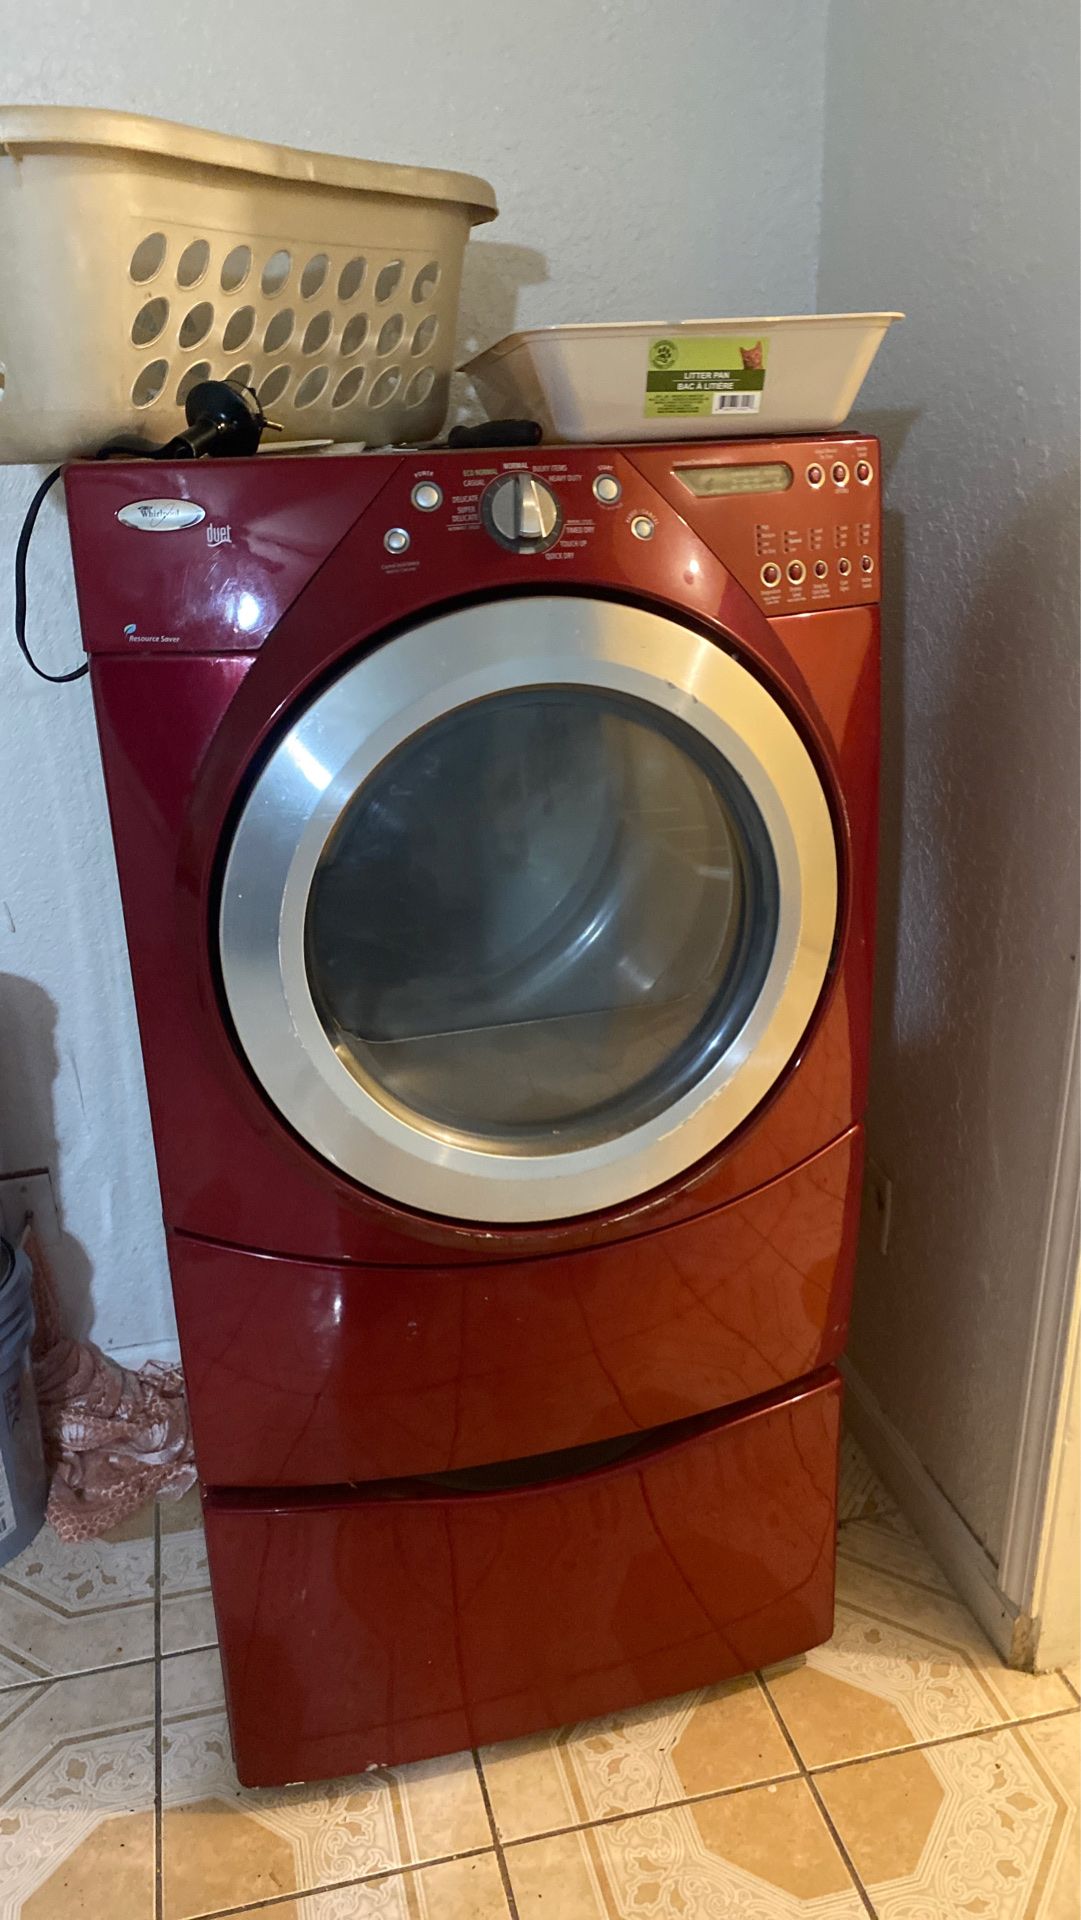 Gas dryer and electric dryer to repair or scrap